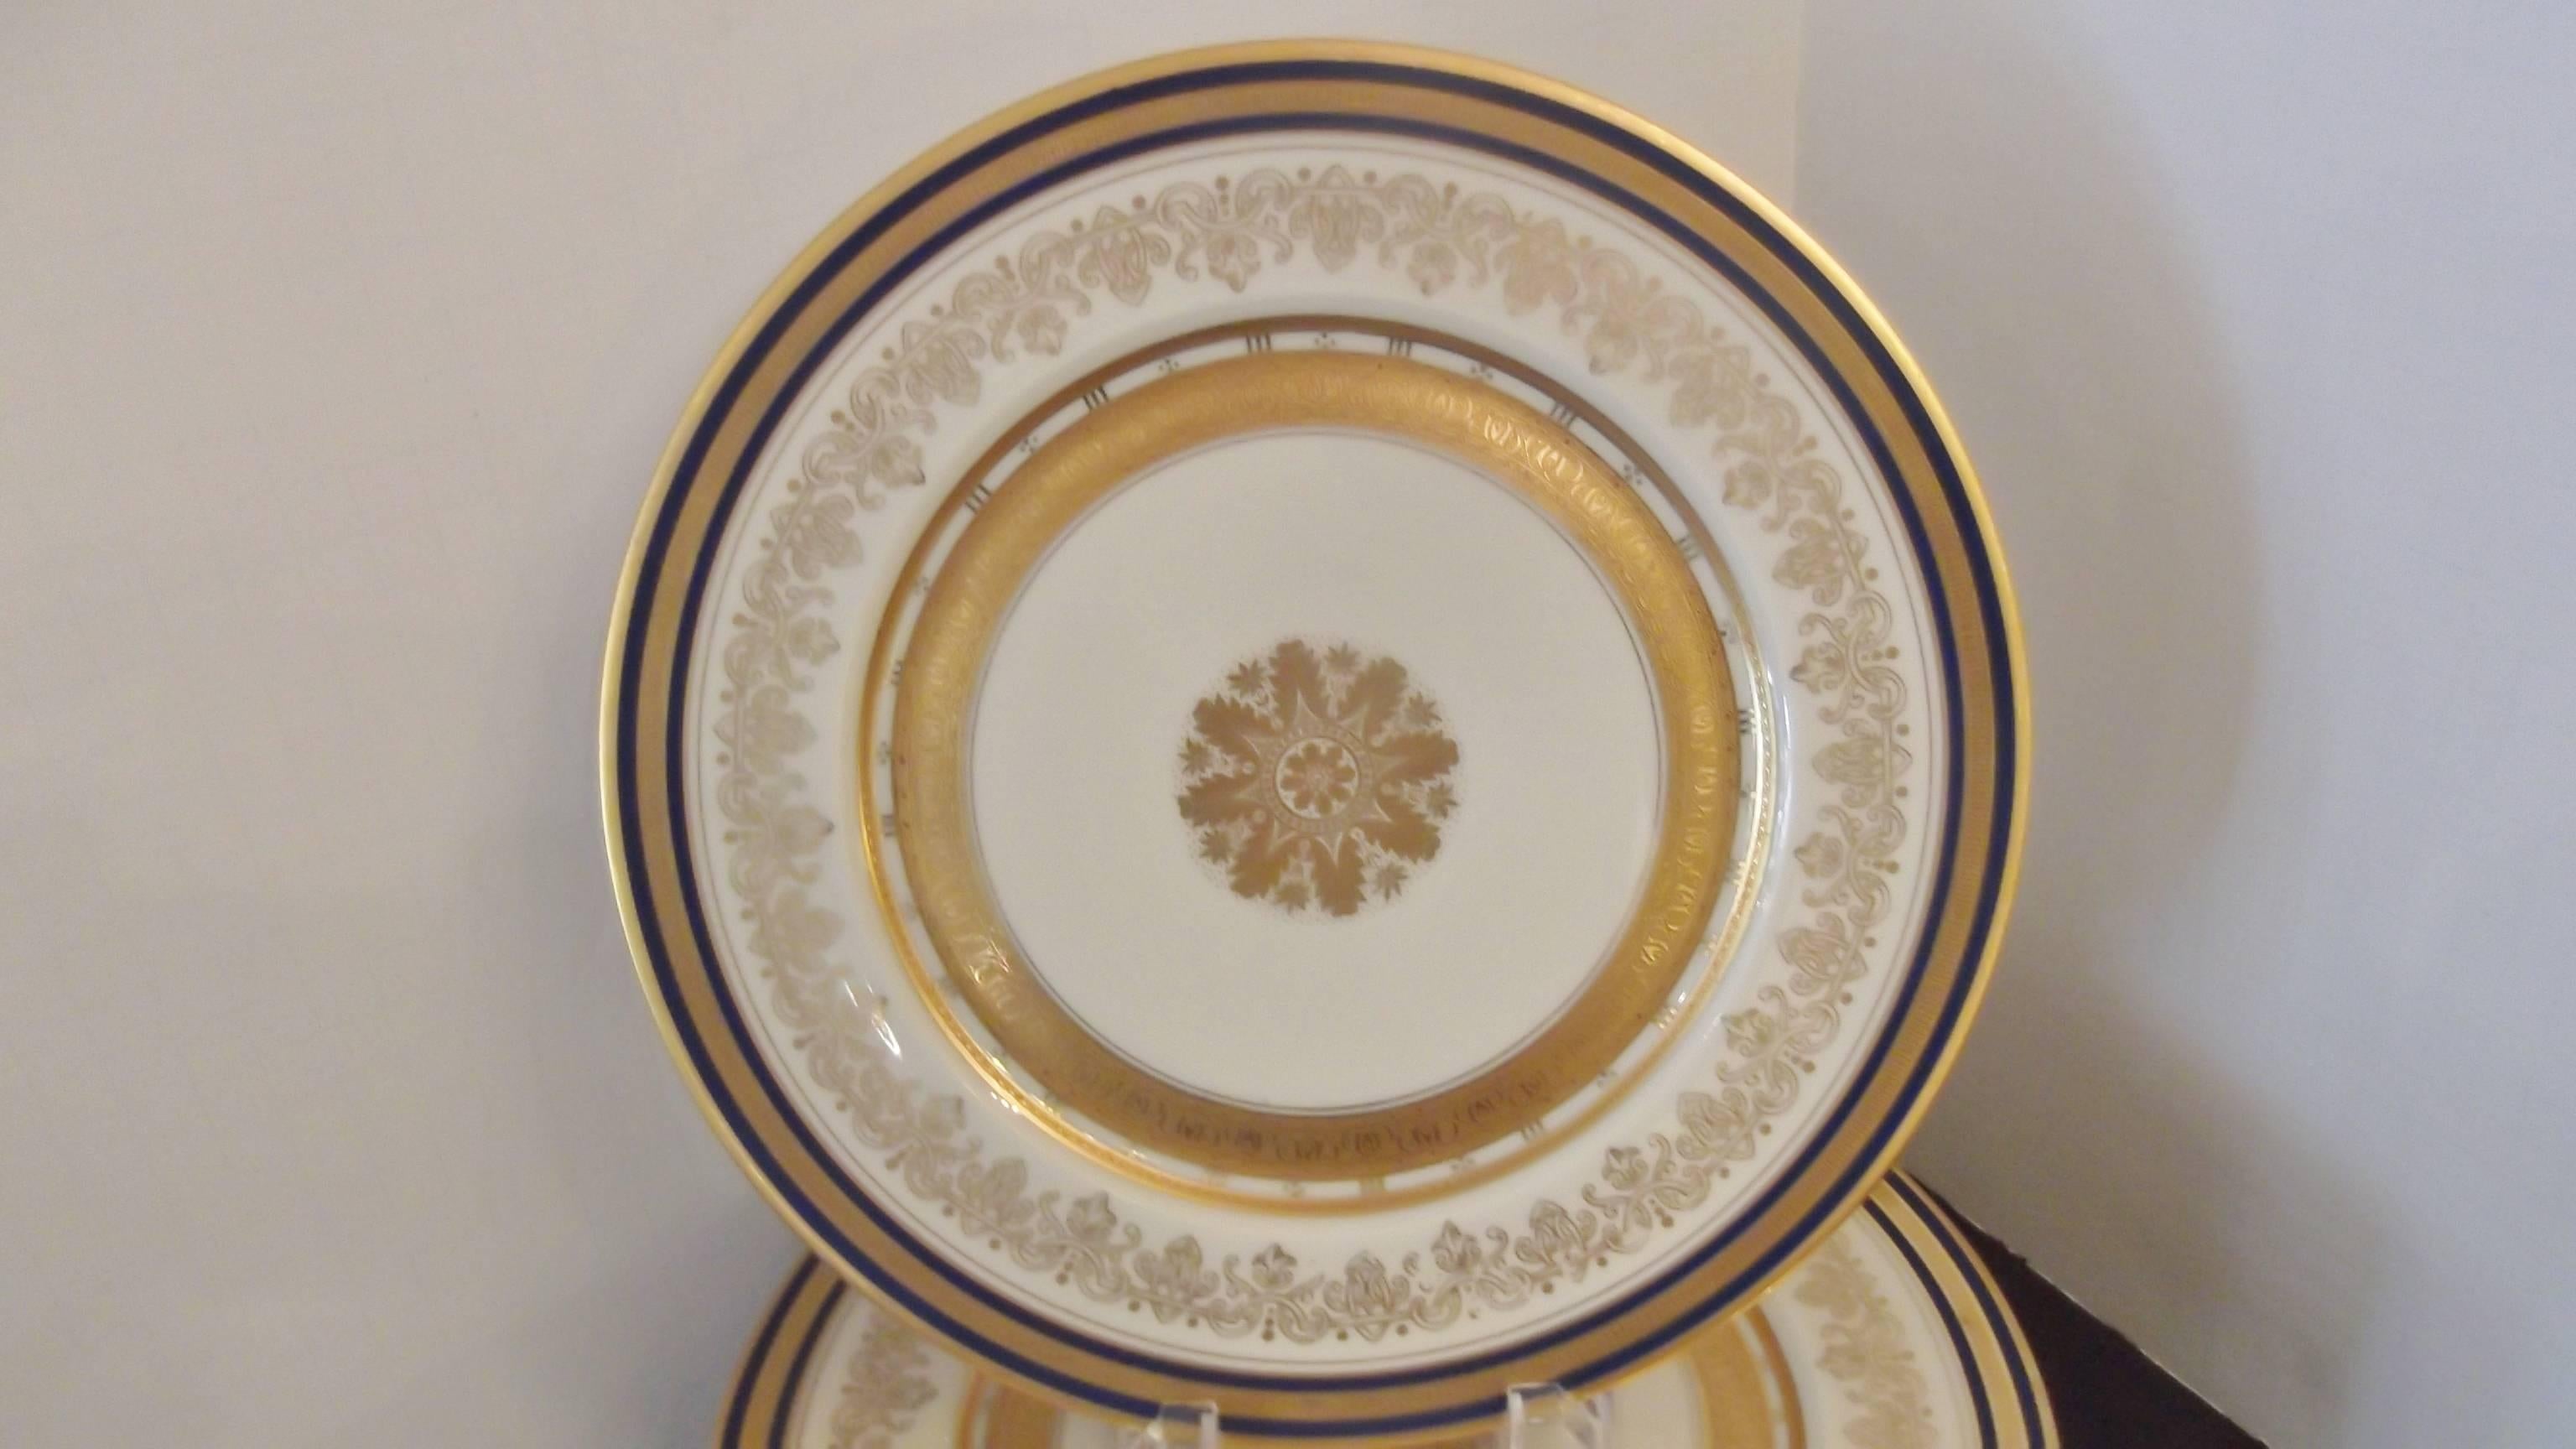 Lovely cobalt banded service plates with gilt borders and center medallion, circa 1920 made by Heinrich & Company, retailed by Ovington Brothers New York, 5th Avenue. Set a beautiful table or display a gorgeous cabinet with a full set of 12. One